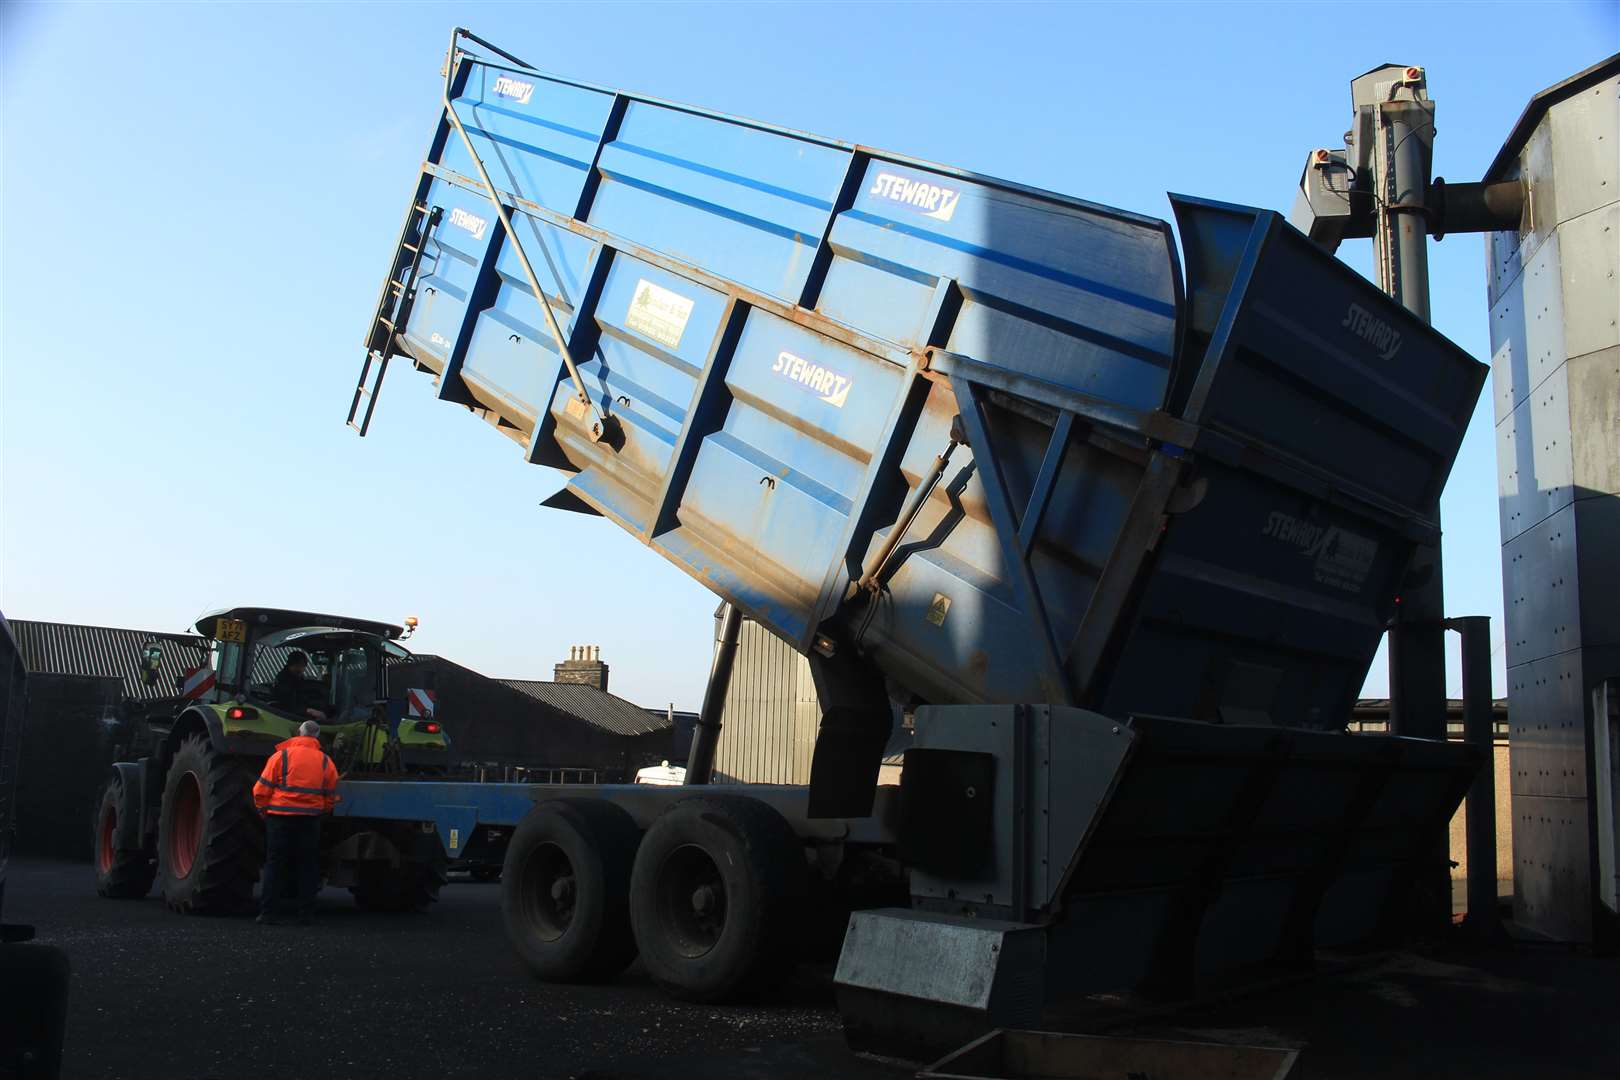 A lorry-load of wood chip being delivered to the Ignis site last week.